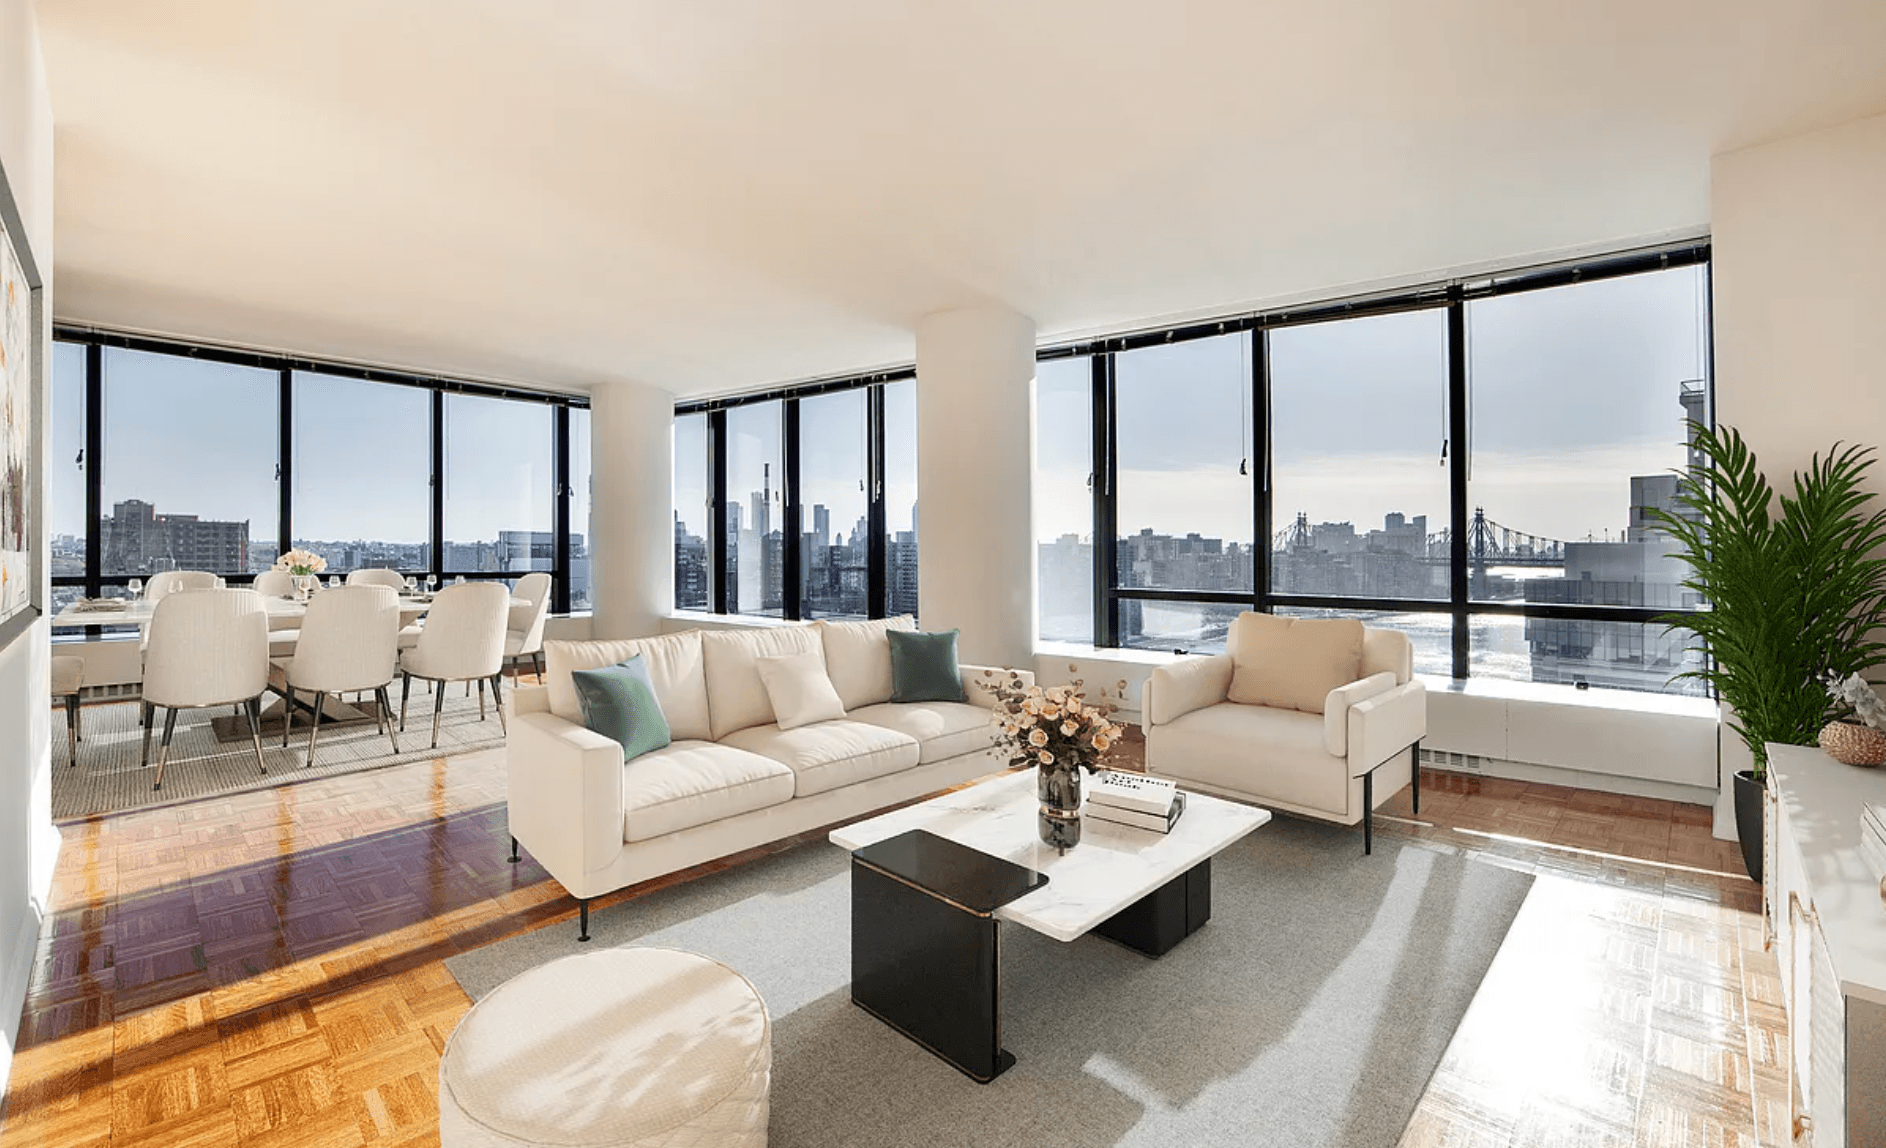 3 Bedroom apartment with River Views in the Heart of the Upper East Side